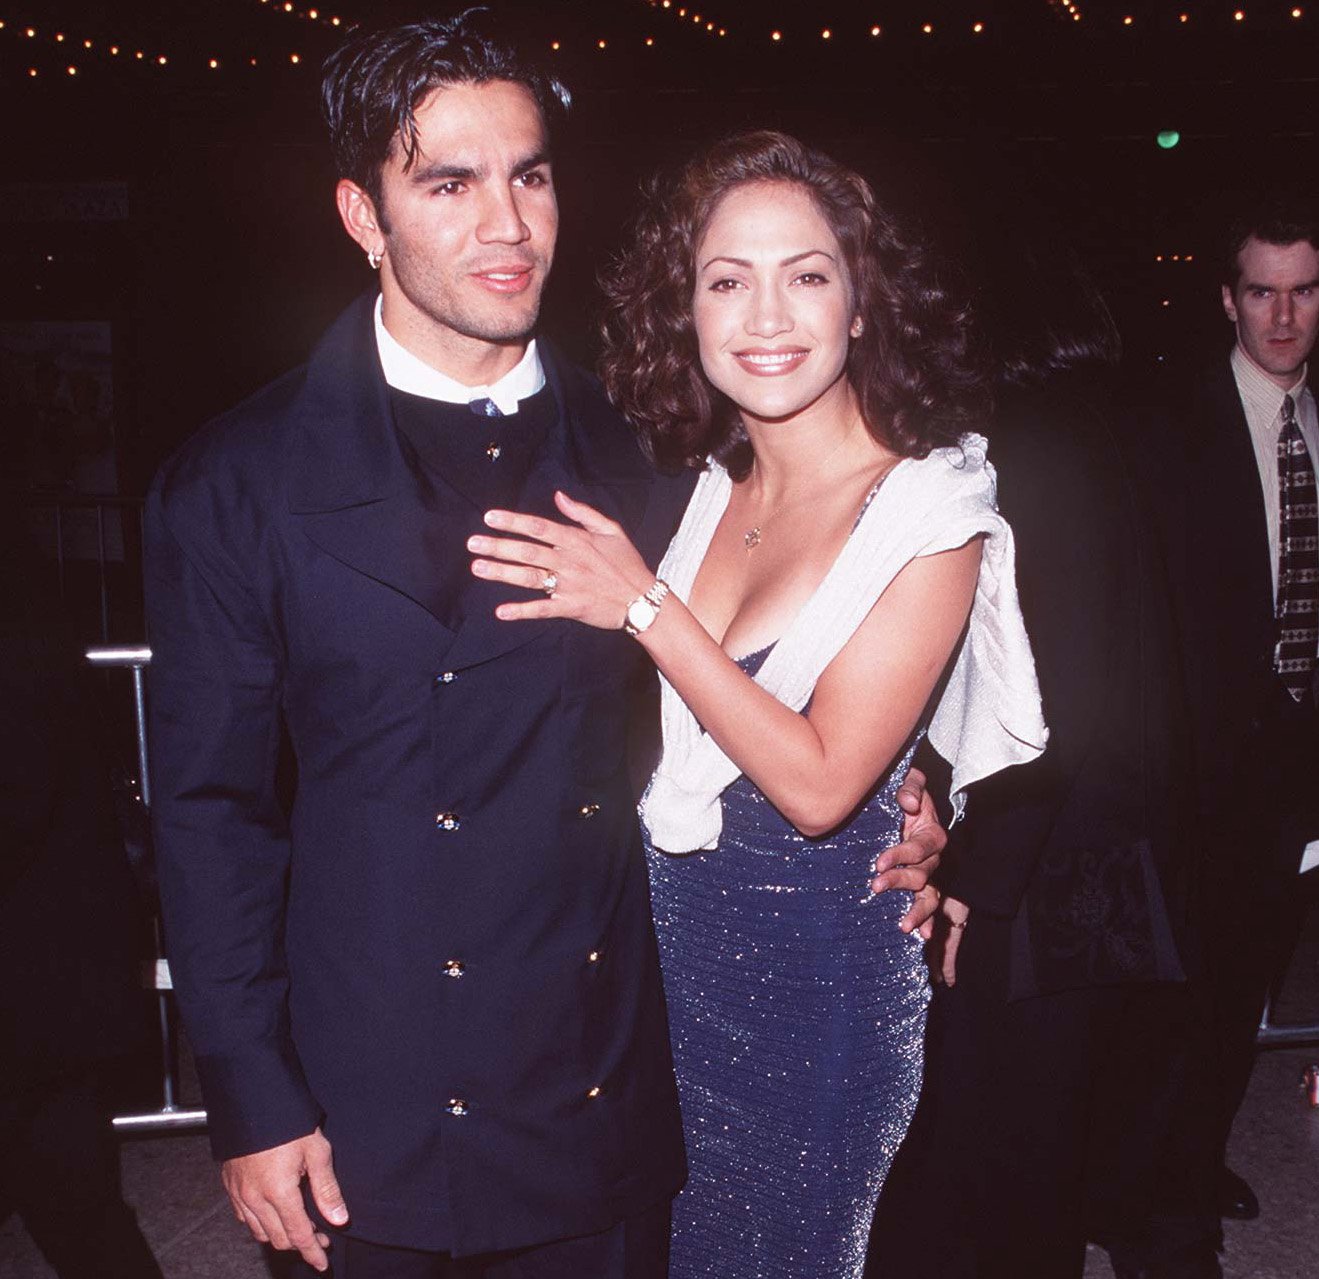 Ojani Noa and Jennifer Lopez attending an event in 1997